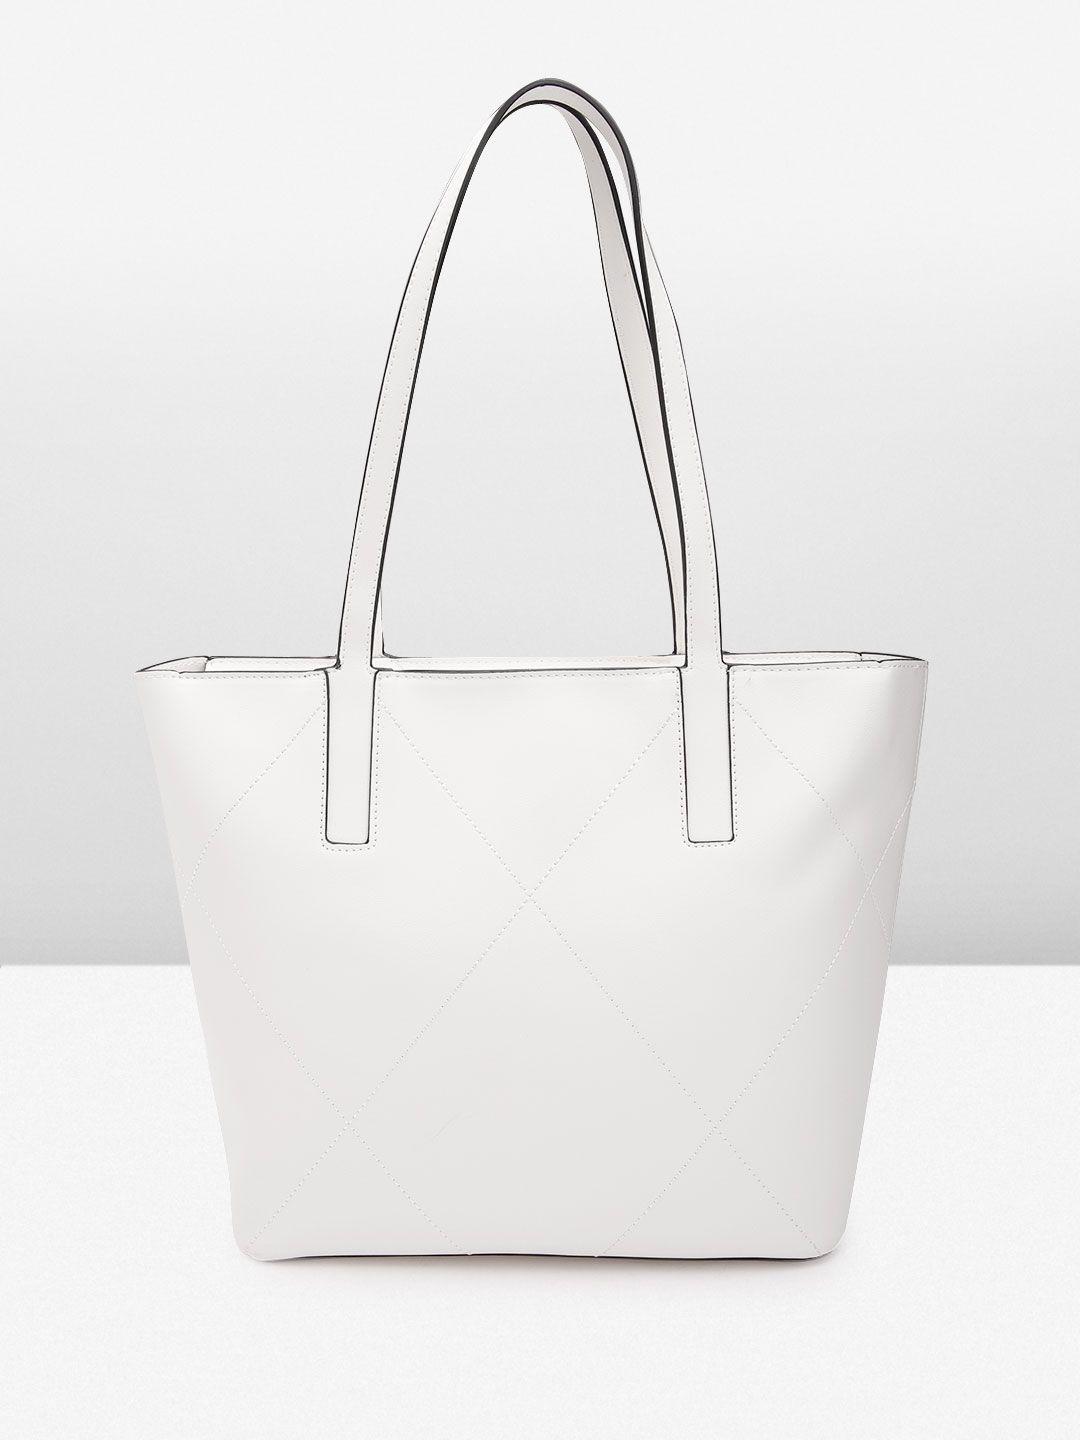 dorothy perkins structured tote bag